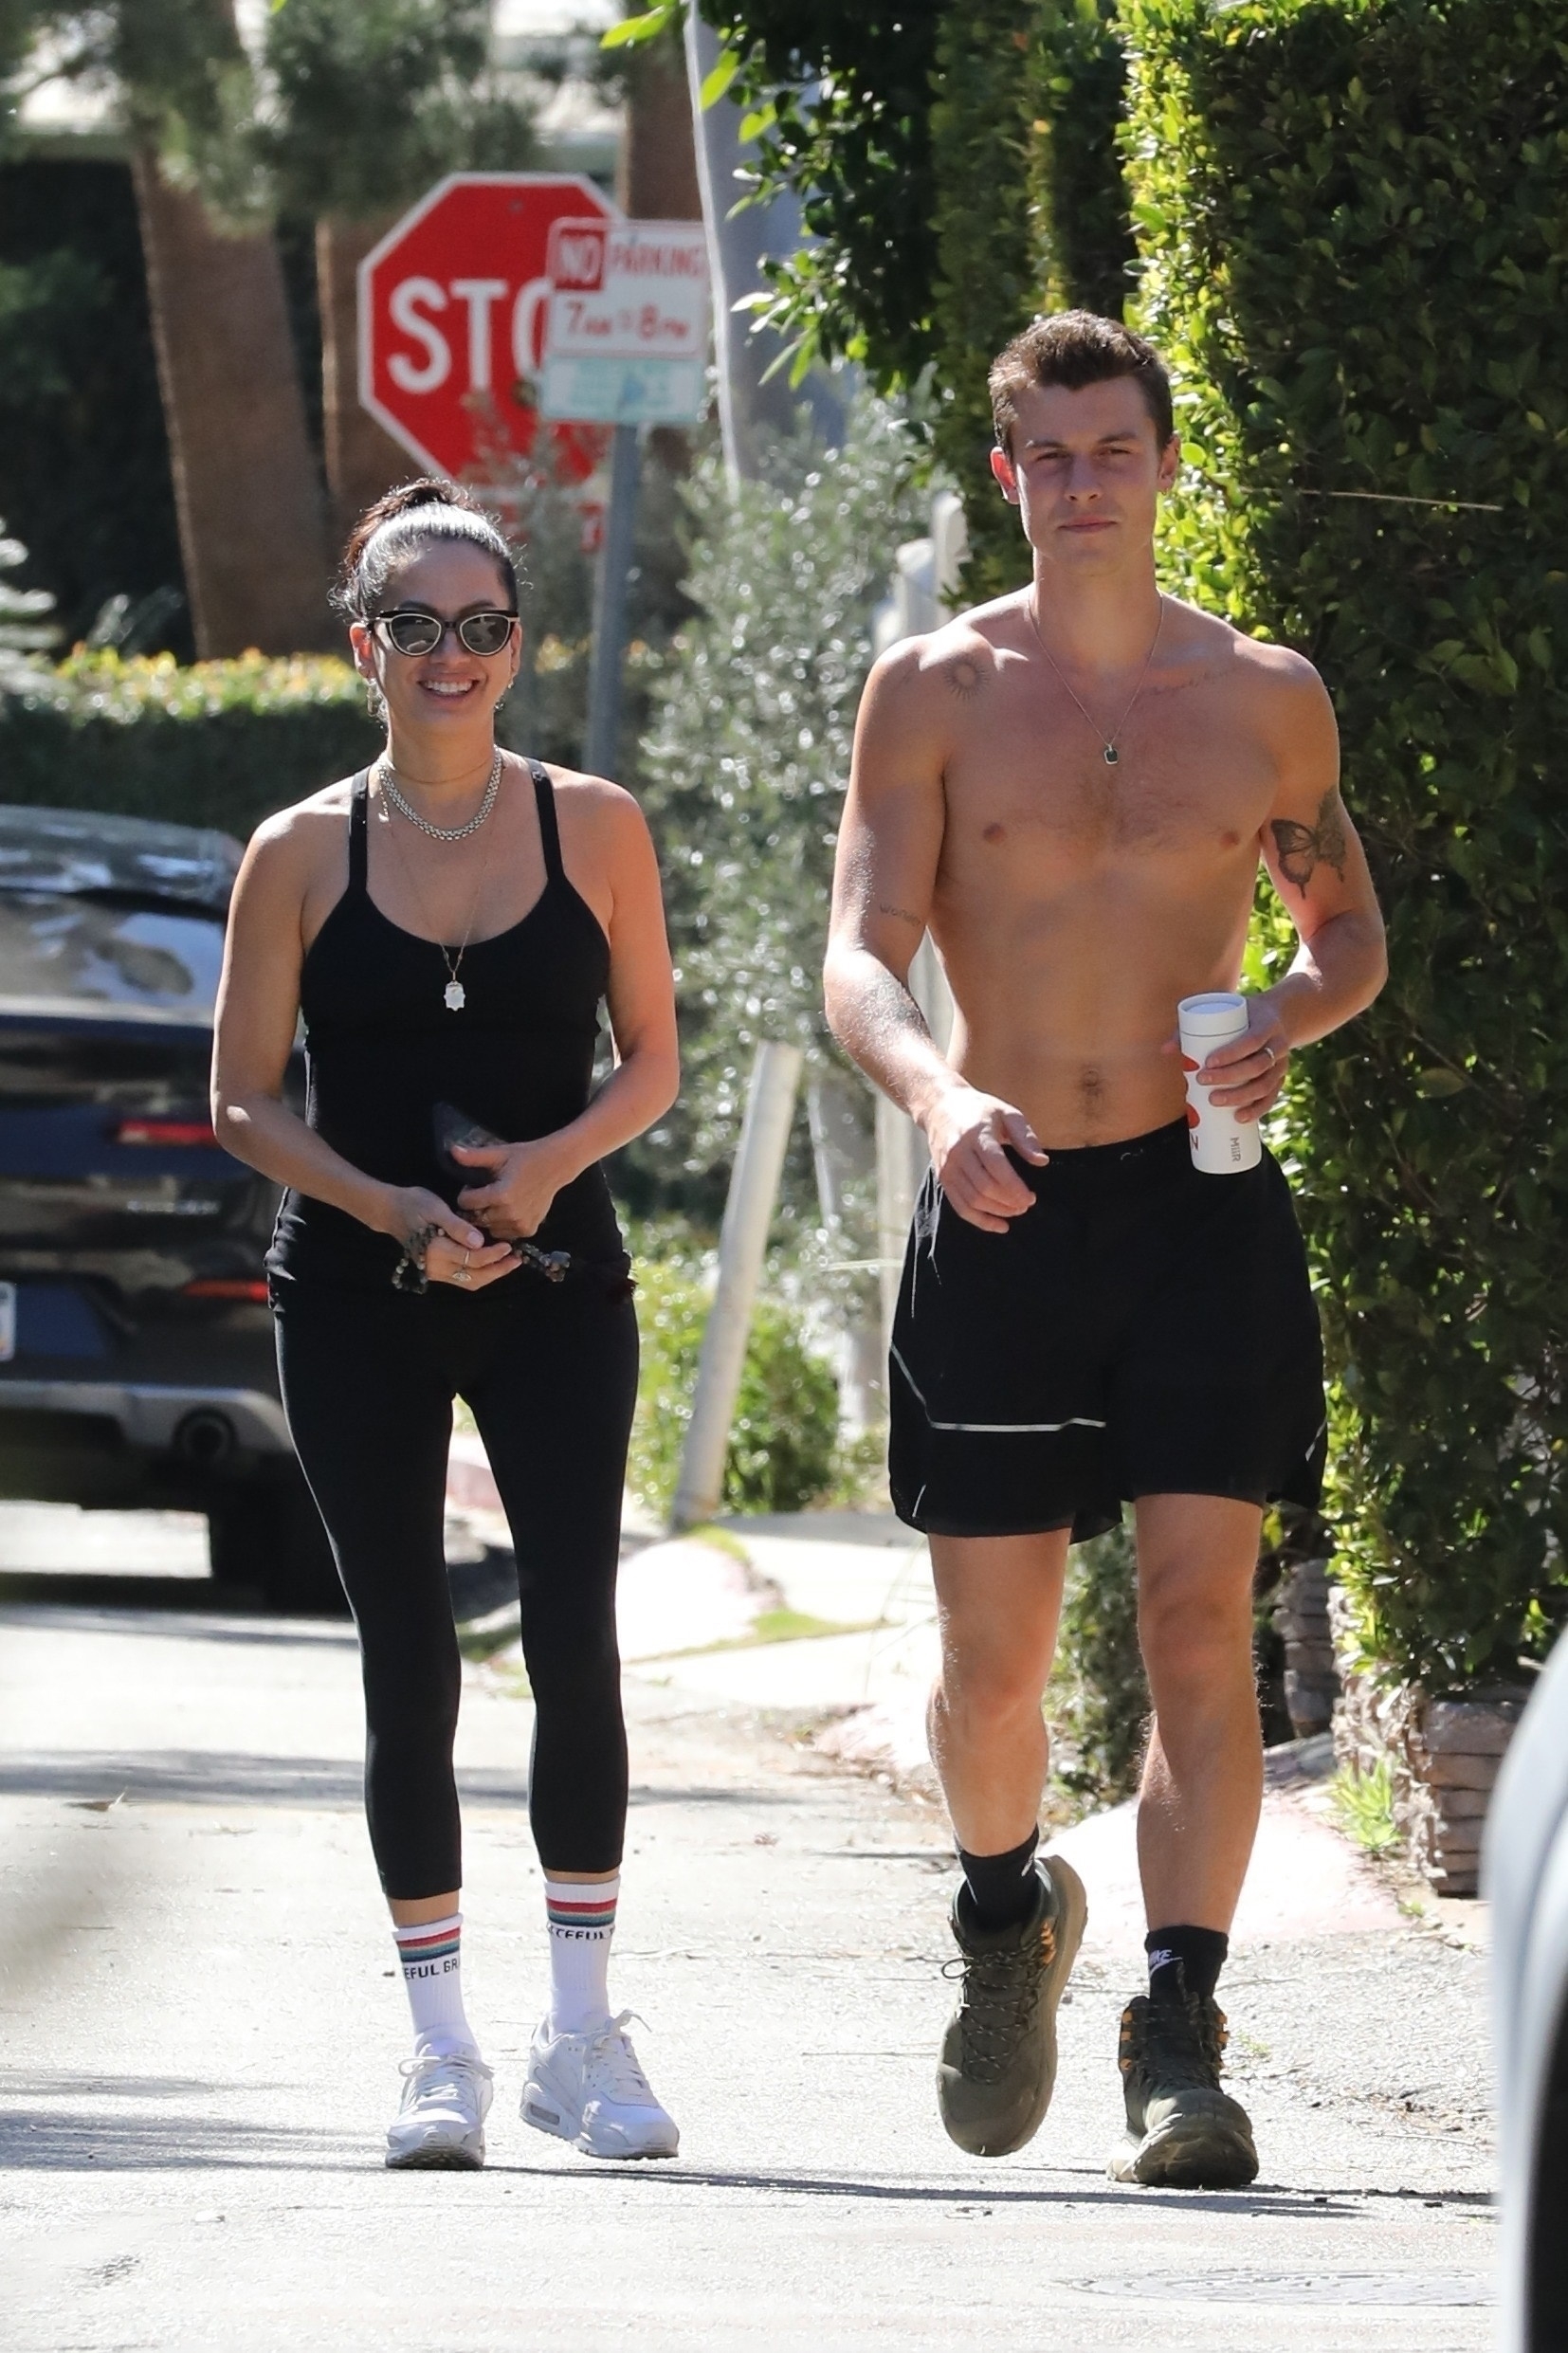 <p>Are they or aren't they? Since the summer of 2022, there's been speculation that pop star Shawn Mendes might be seeing chiropractor Jocelyne Miranda, a stunner who's 26 years his senior. Romance reports have flourished ever since the pair were spotted together having lunch, heading to a Grammys afterparty, going on a grocery run and chilling at Shawn's Los Angeles home. In February 2023, a 24-year-old Shawn and a 50-year-old Jocelyne were snapped spending time together yet again on a hike at L.A.'s Runyon Canyon Park (pictured).</p>